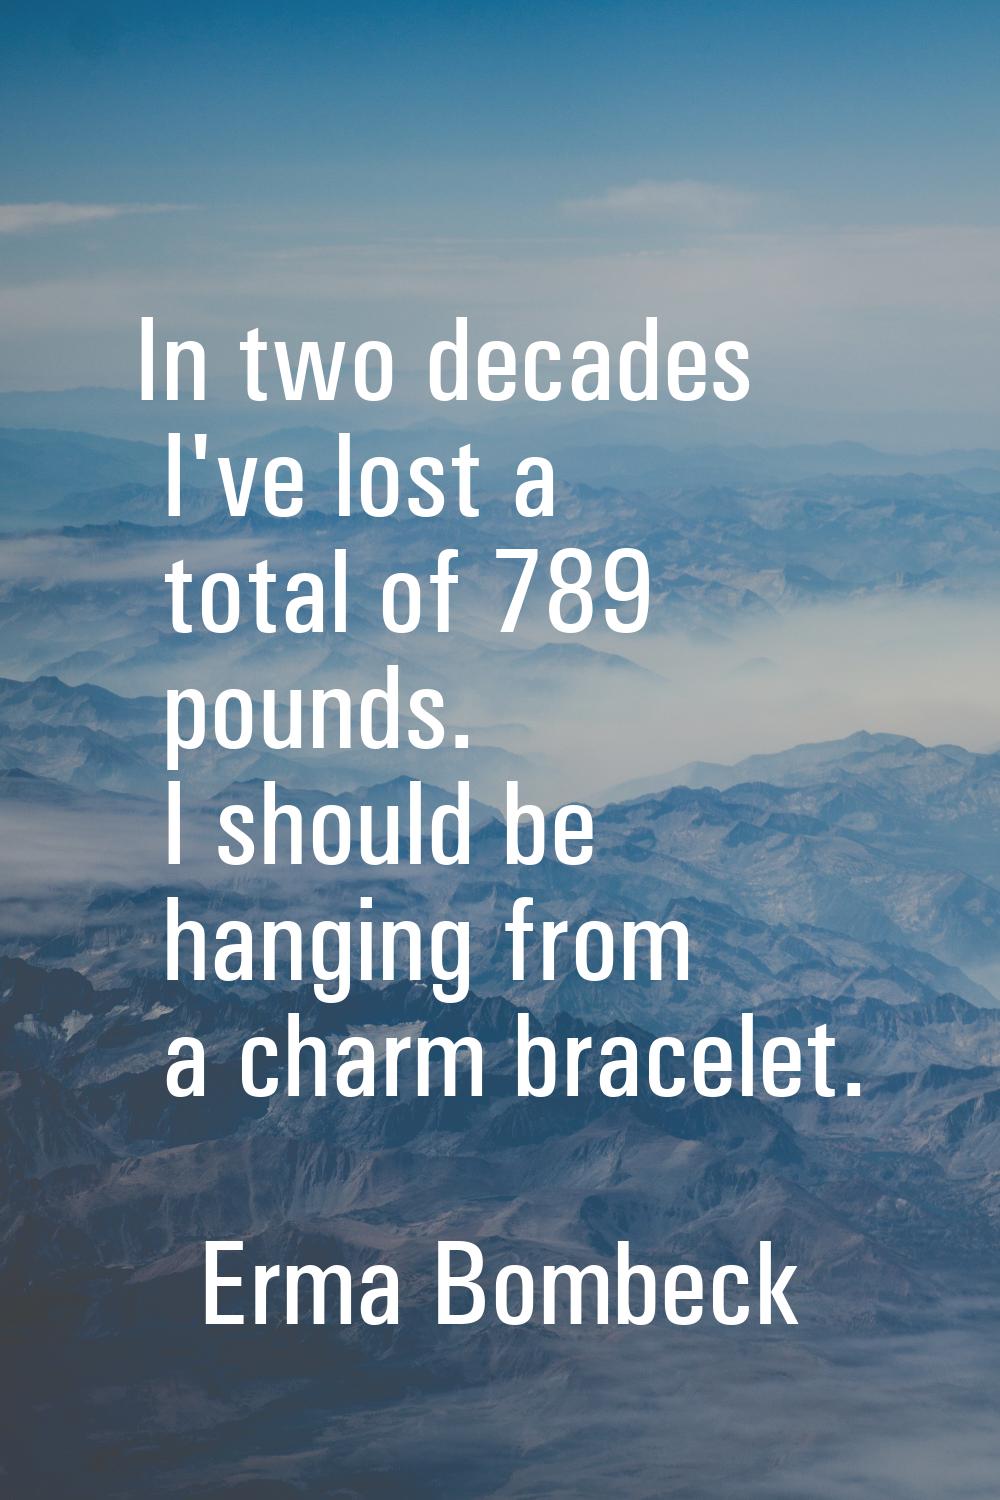 In two decades I've lost a total of 789 pounds. I should be hanging from a charm bracelet.